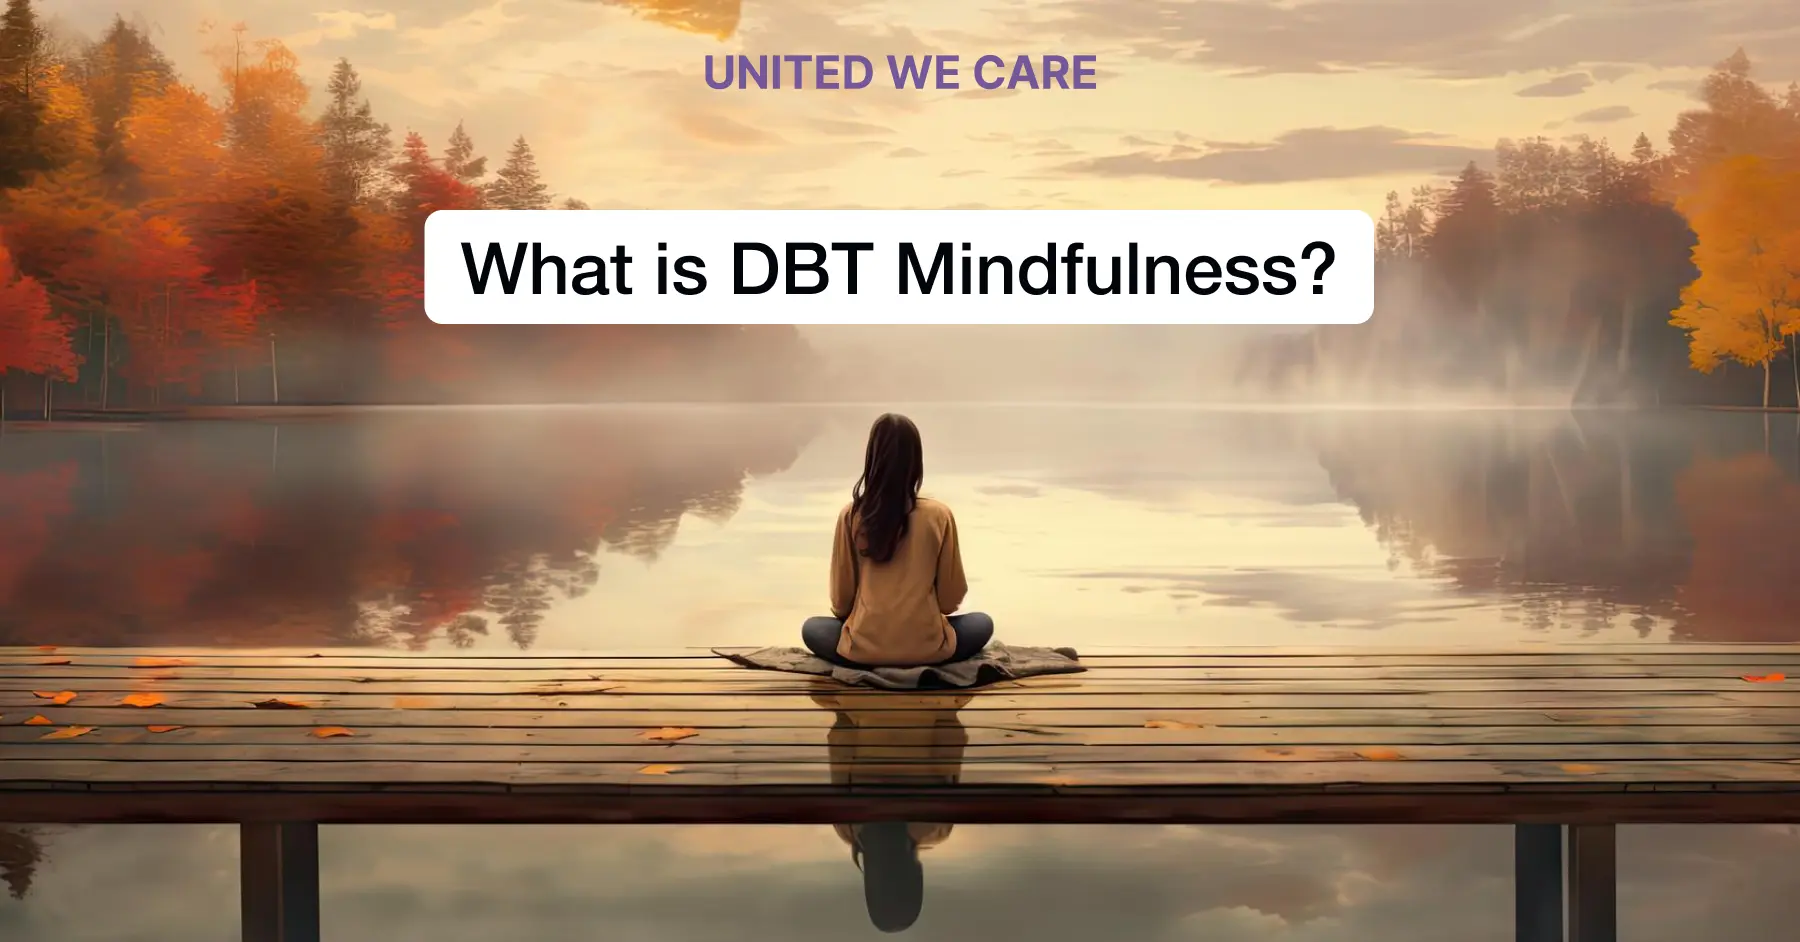 What is DBT Mindfulness?